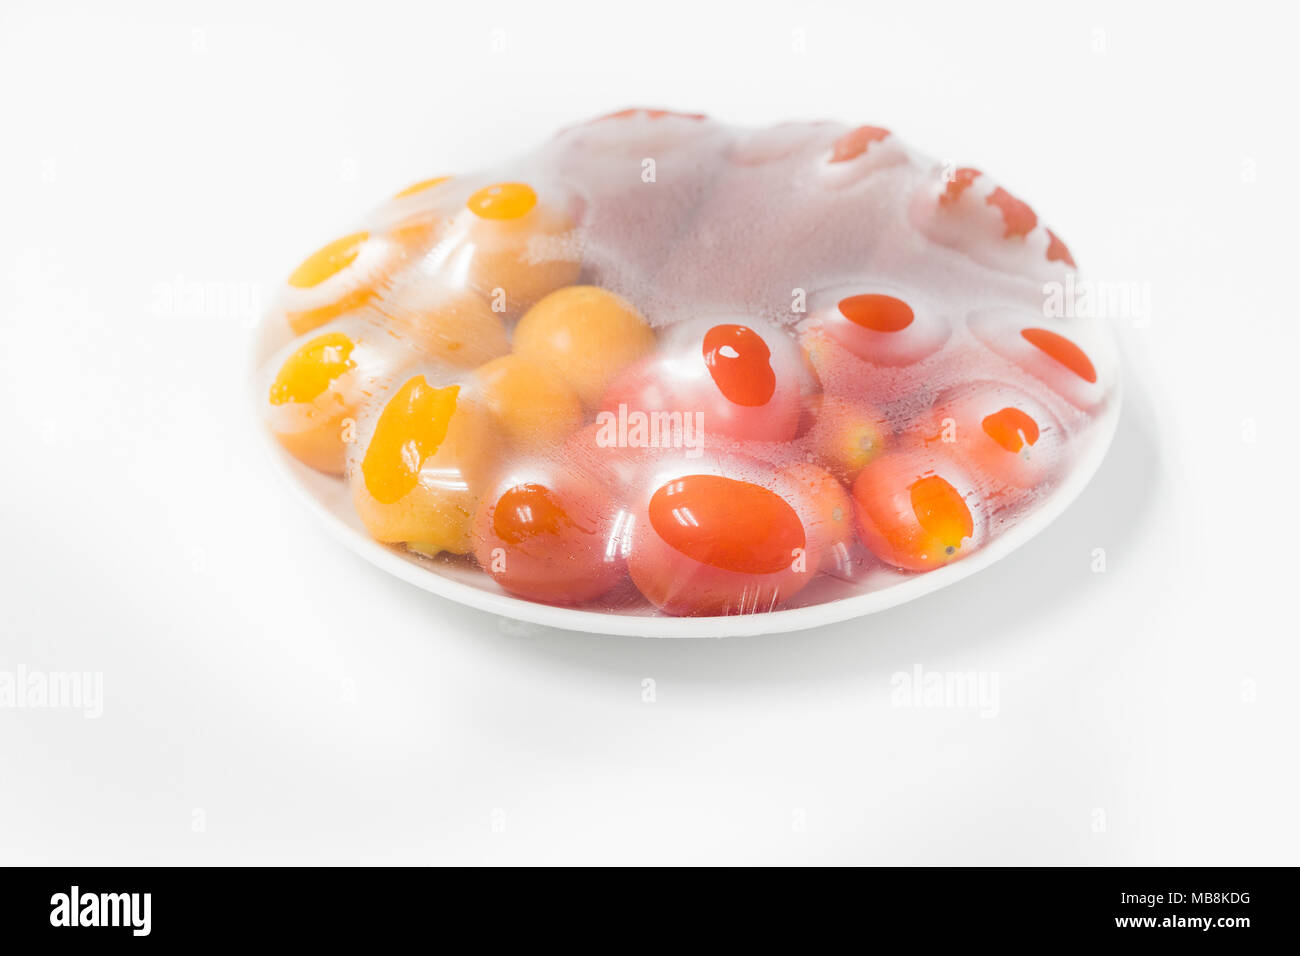 https://c8.alamy.com/comp/MB8KDG/fruits-that-are-wrapped-with-plastic-film-preservation-to-maintain-the-freshness-of-the-fruit-MB8KDG.jpg